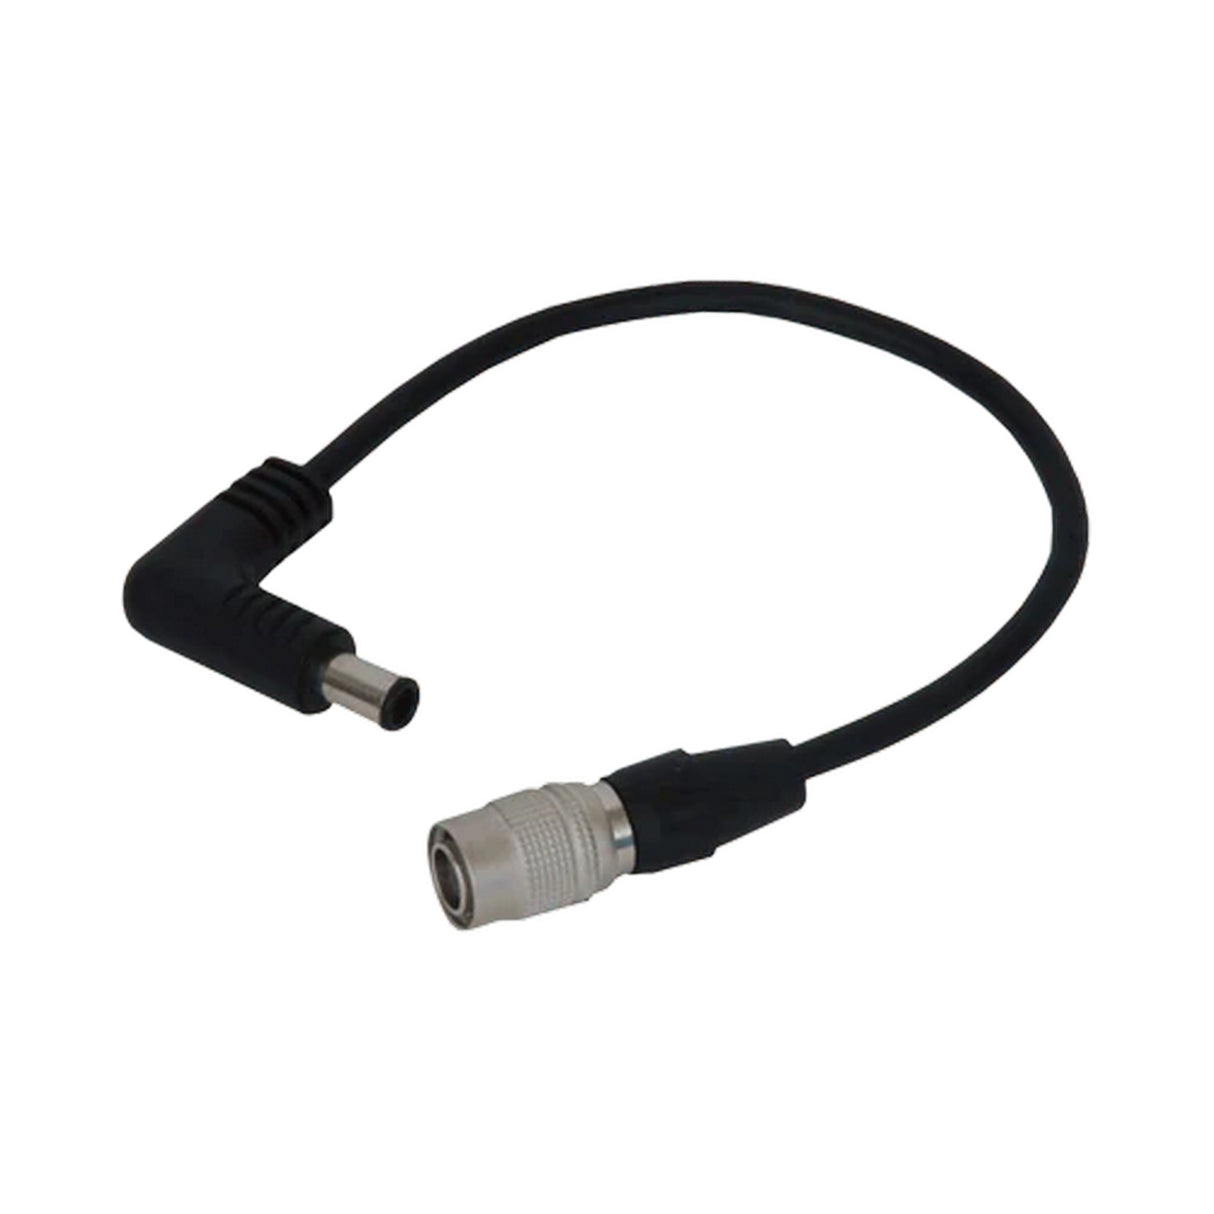 IDX DC-XF DC Power Cable for ST-7R to Canon XF205